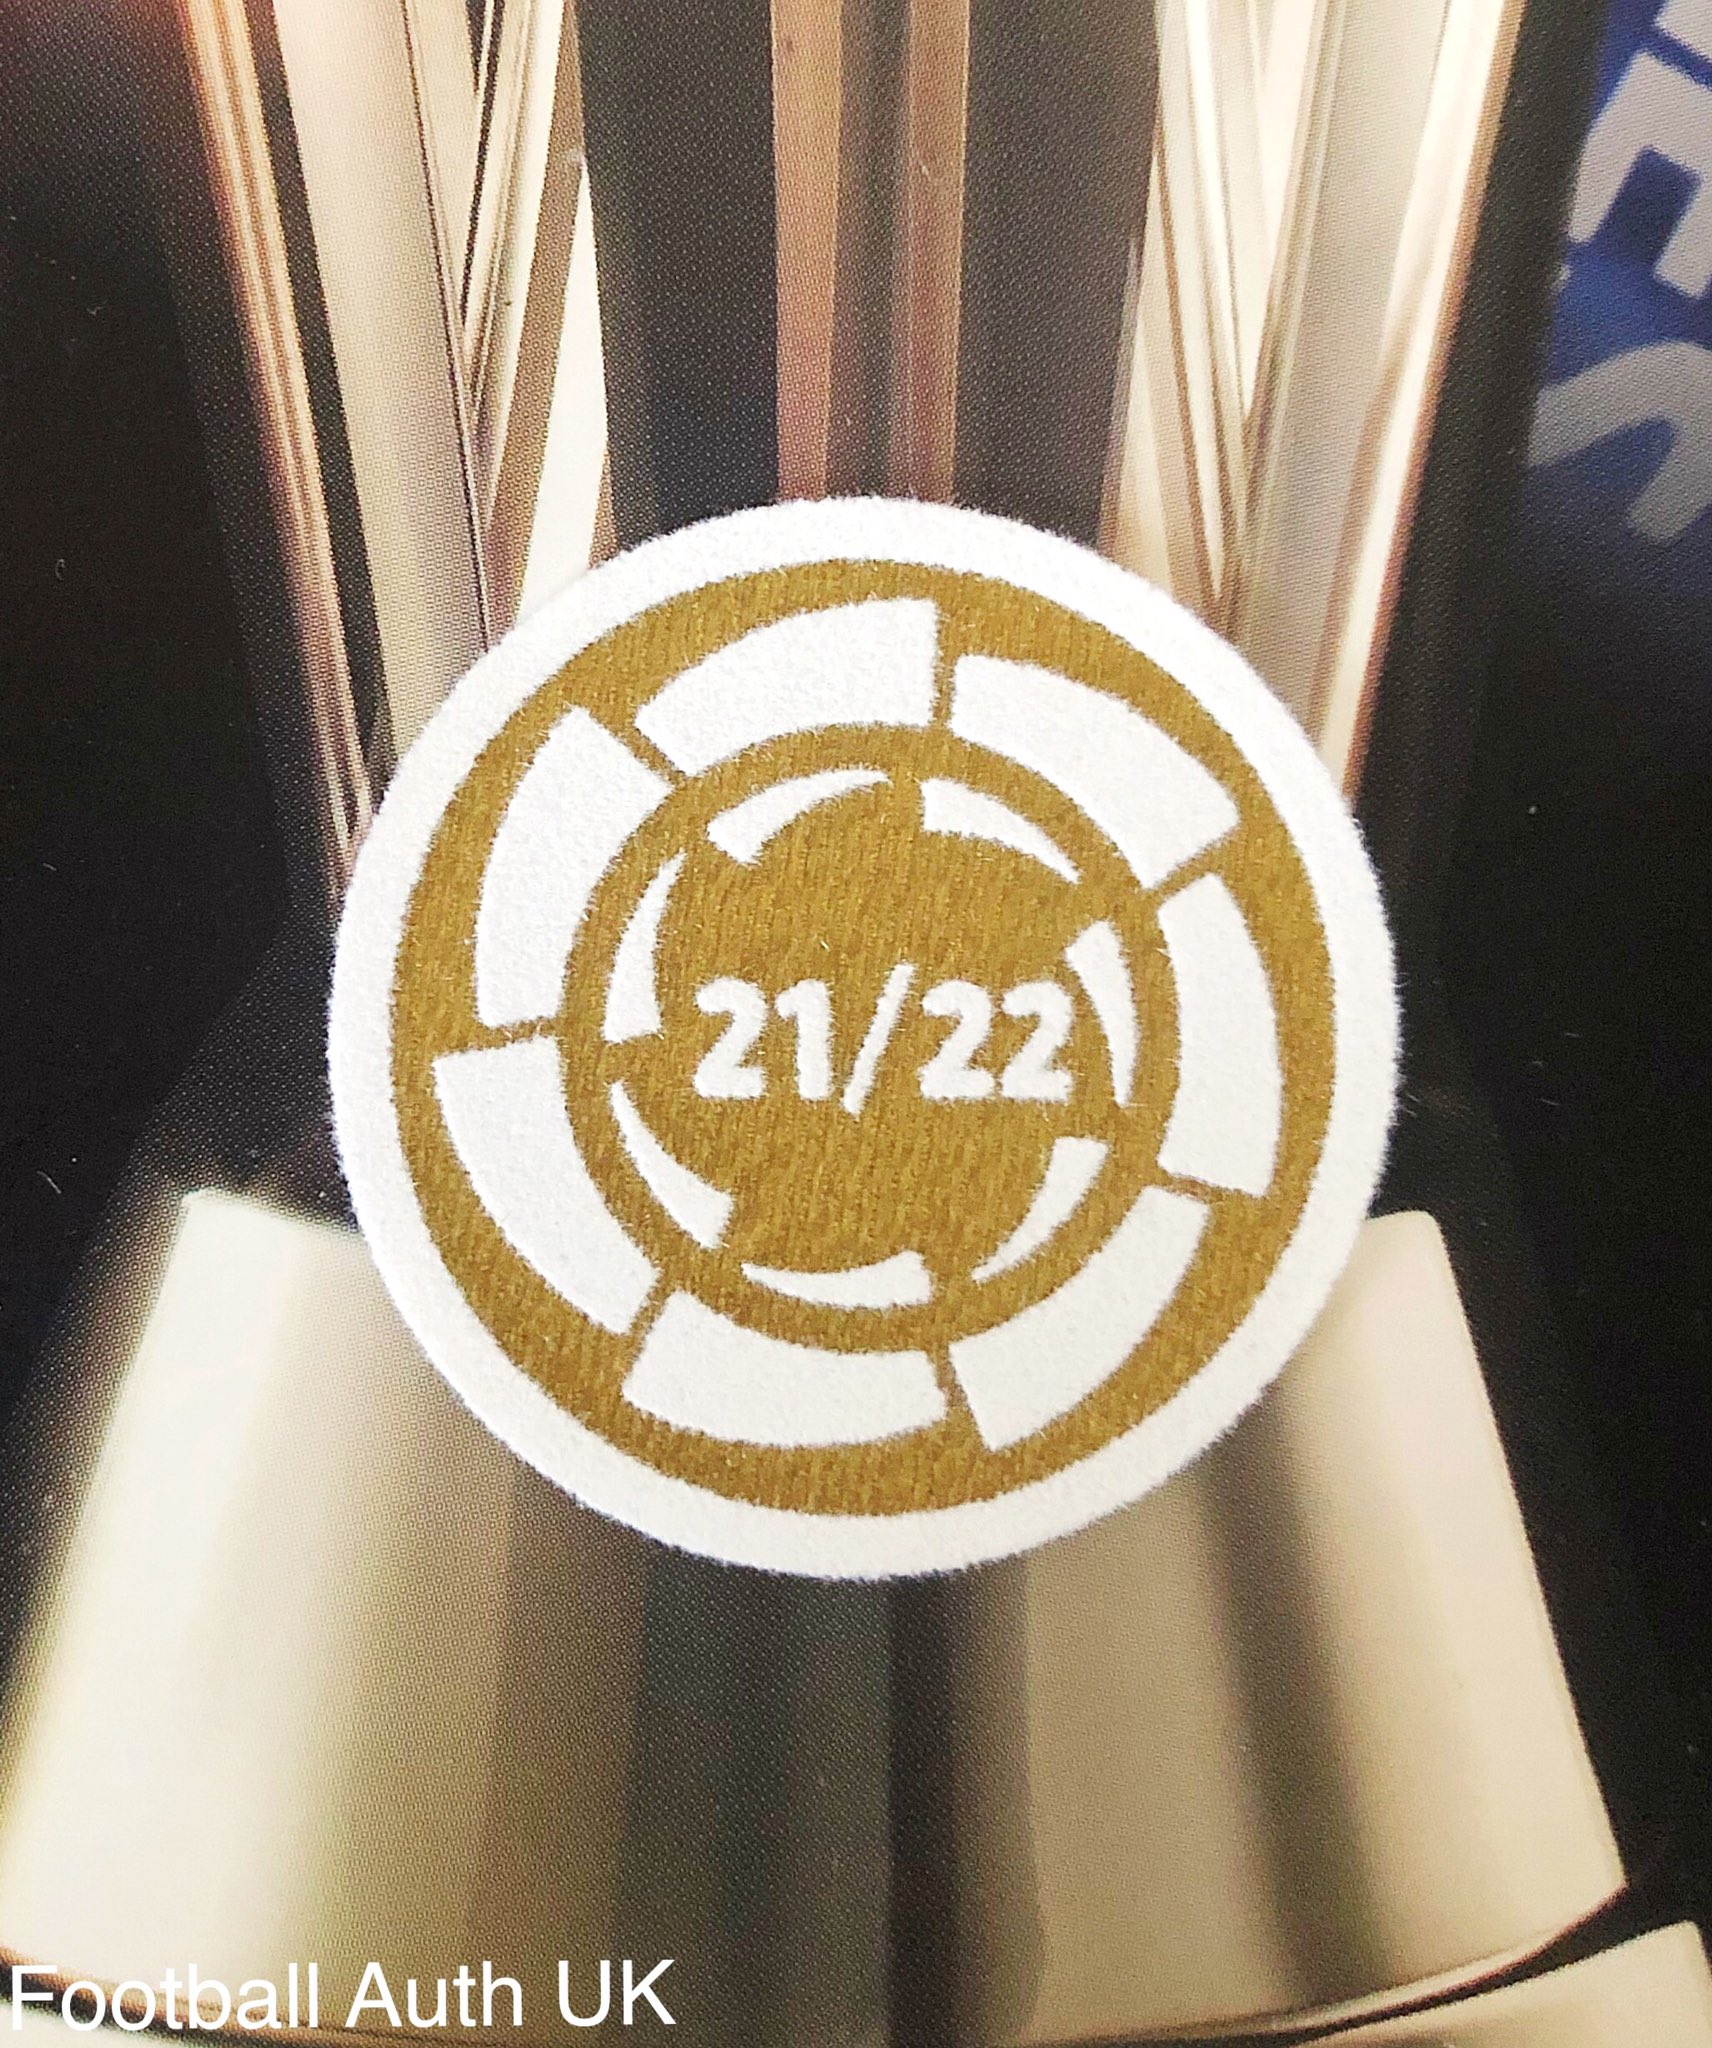 Football on "21-22 Real Madrid La Champion Football Badge Patch 22-23 Real Madrid Shirts Only Official player issue size items stock on website now✓👀 #Real Madrid #LaLiga #HalaMadrid